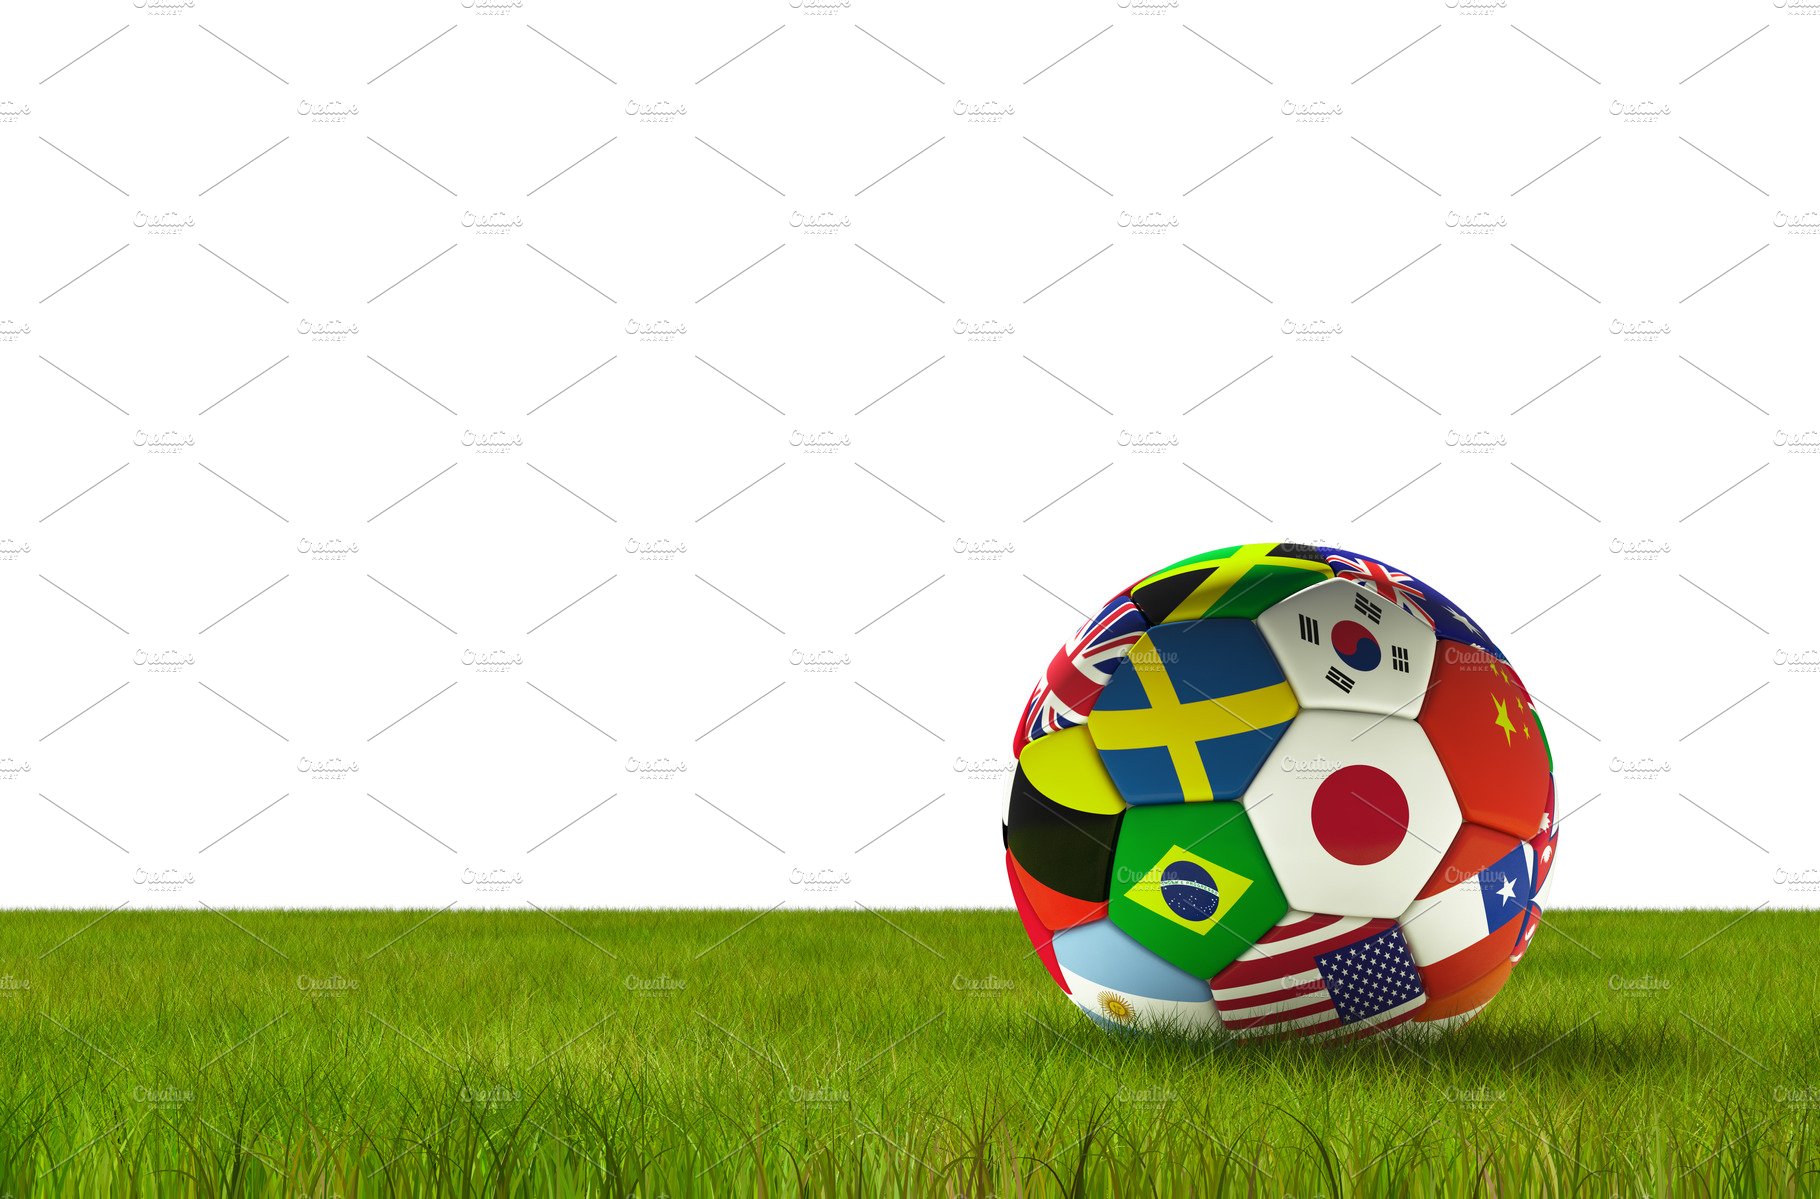 Soccer football with country flags isolated on white background with lush g... cover image.